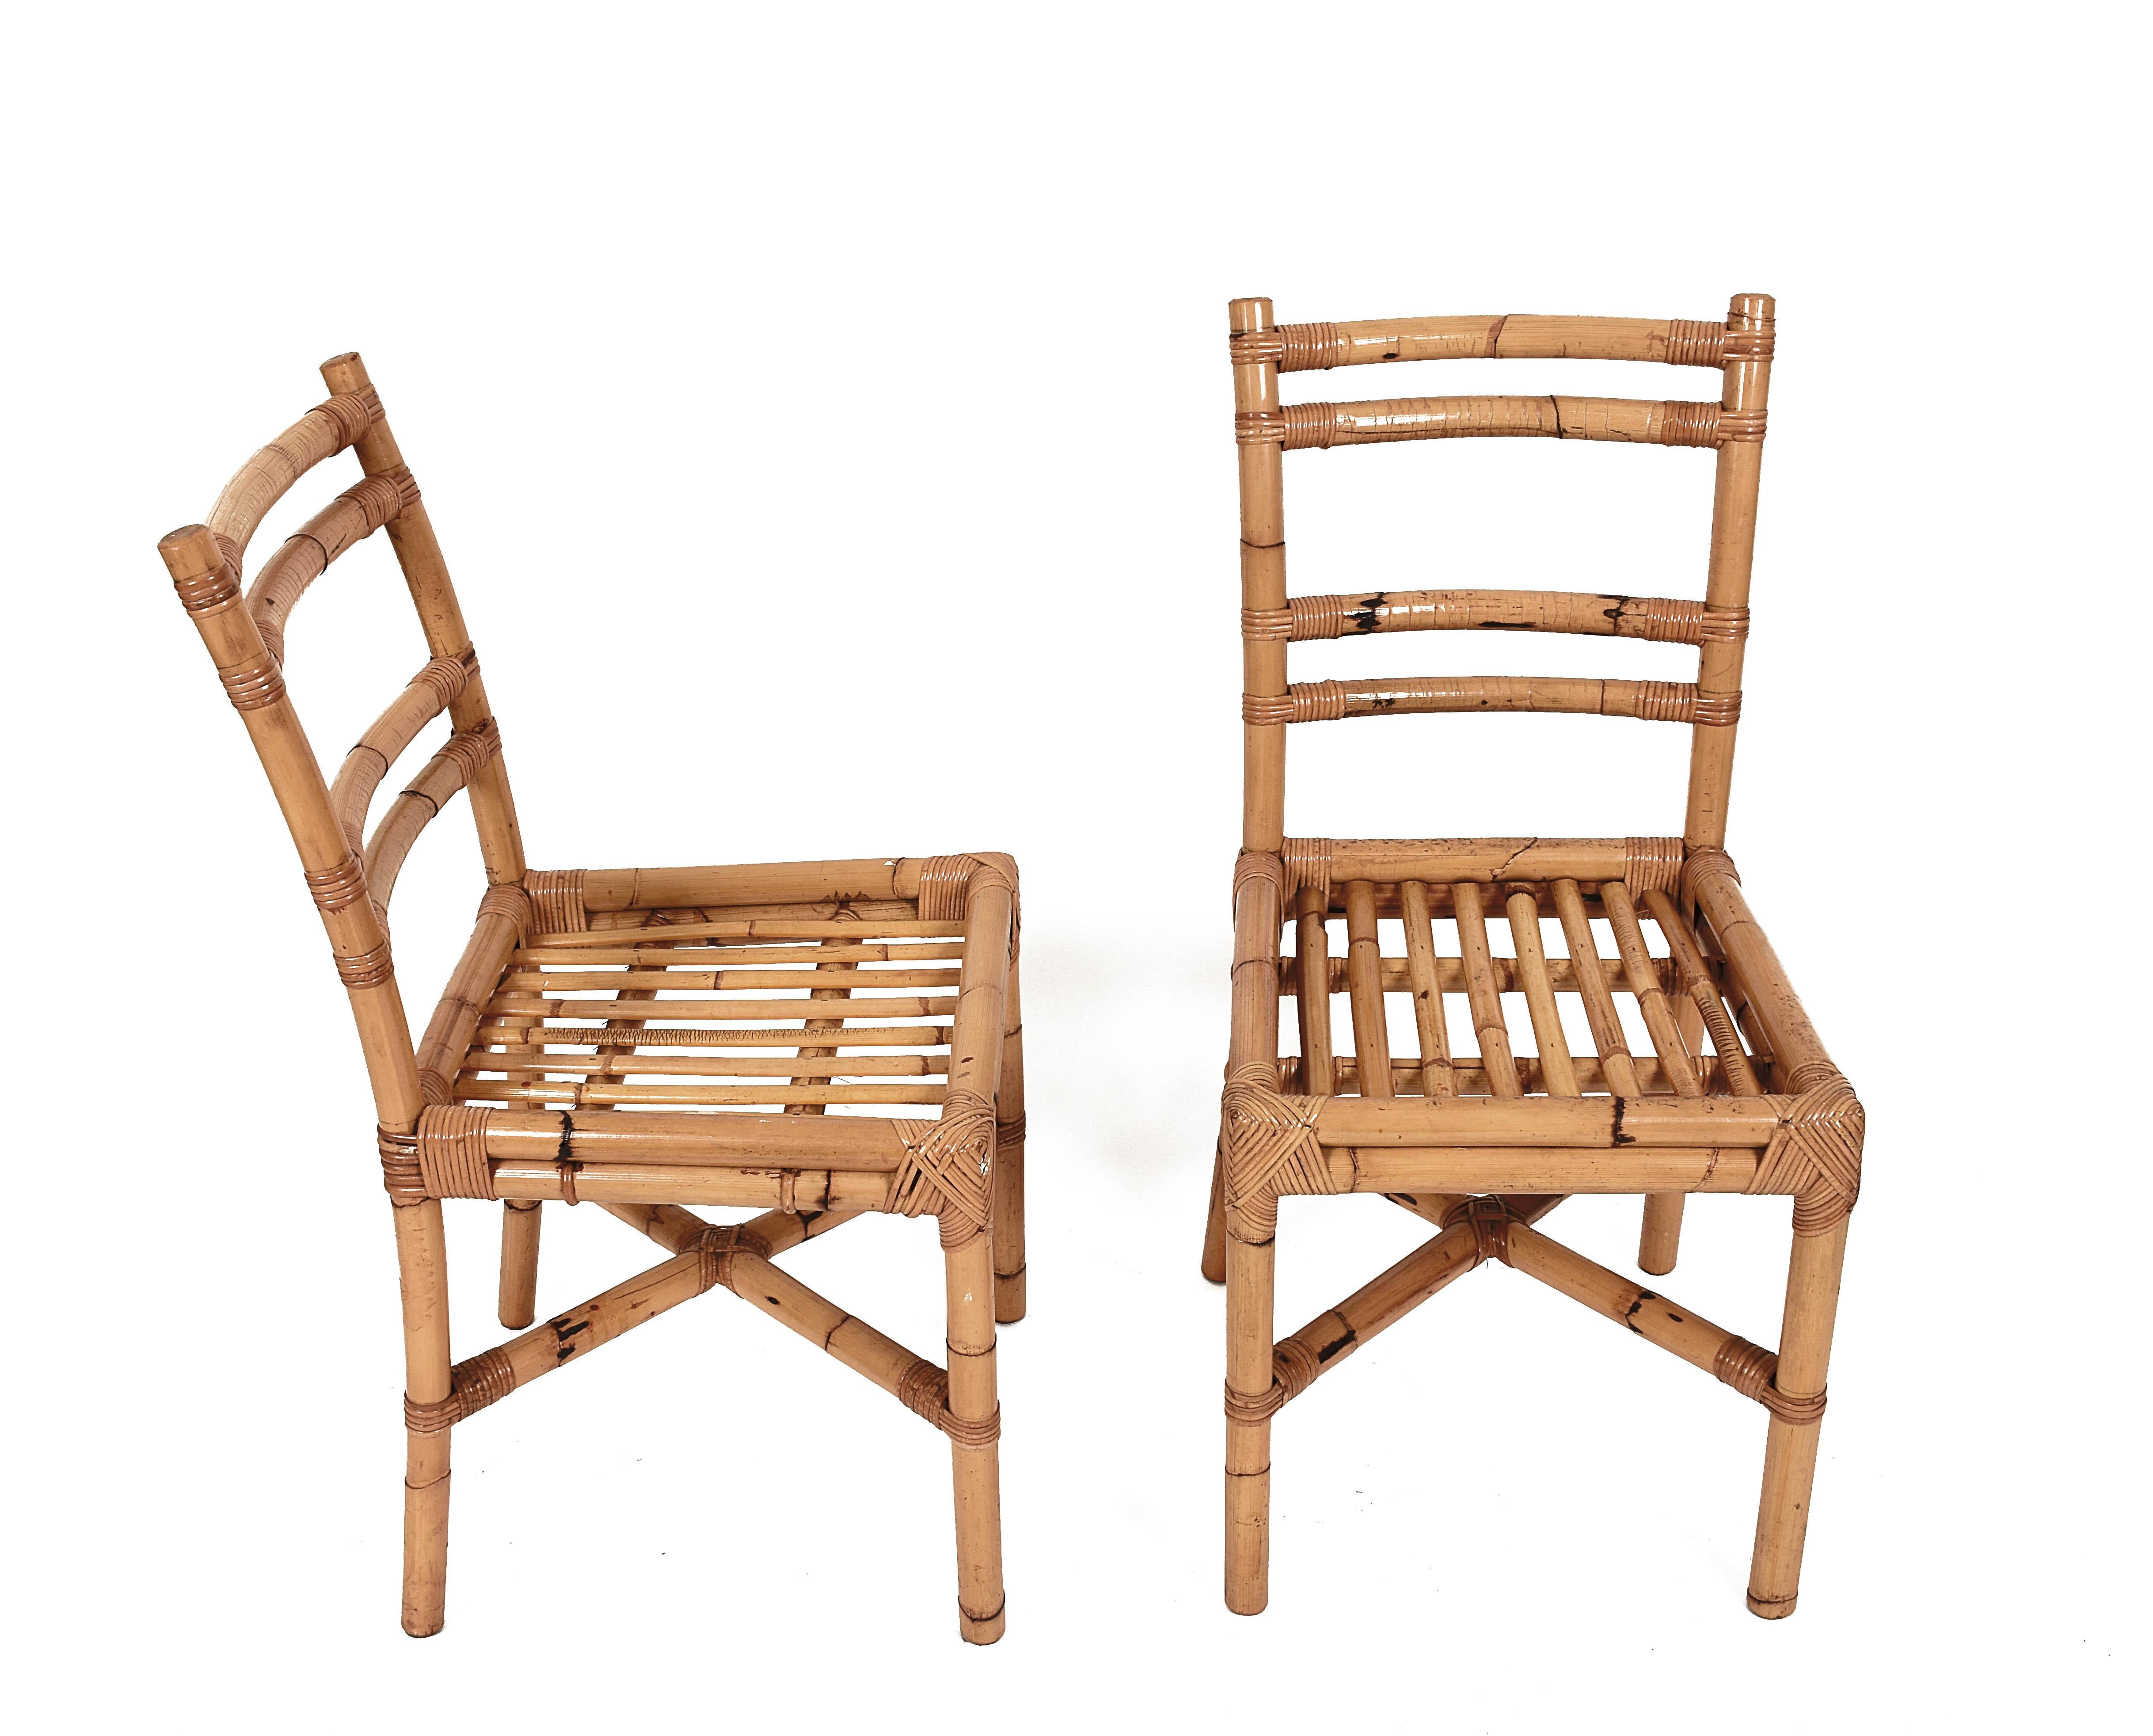 Late 20th Century Midcentury Rattan Dining Room Italian Side Chairs with Rattan Sticks Seat, 1970s